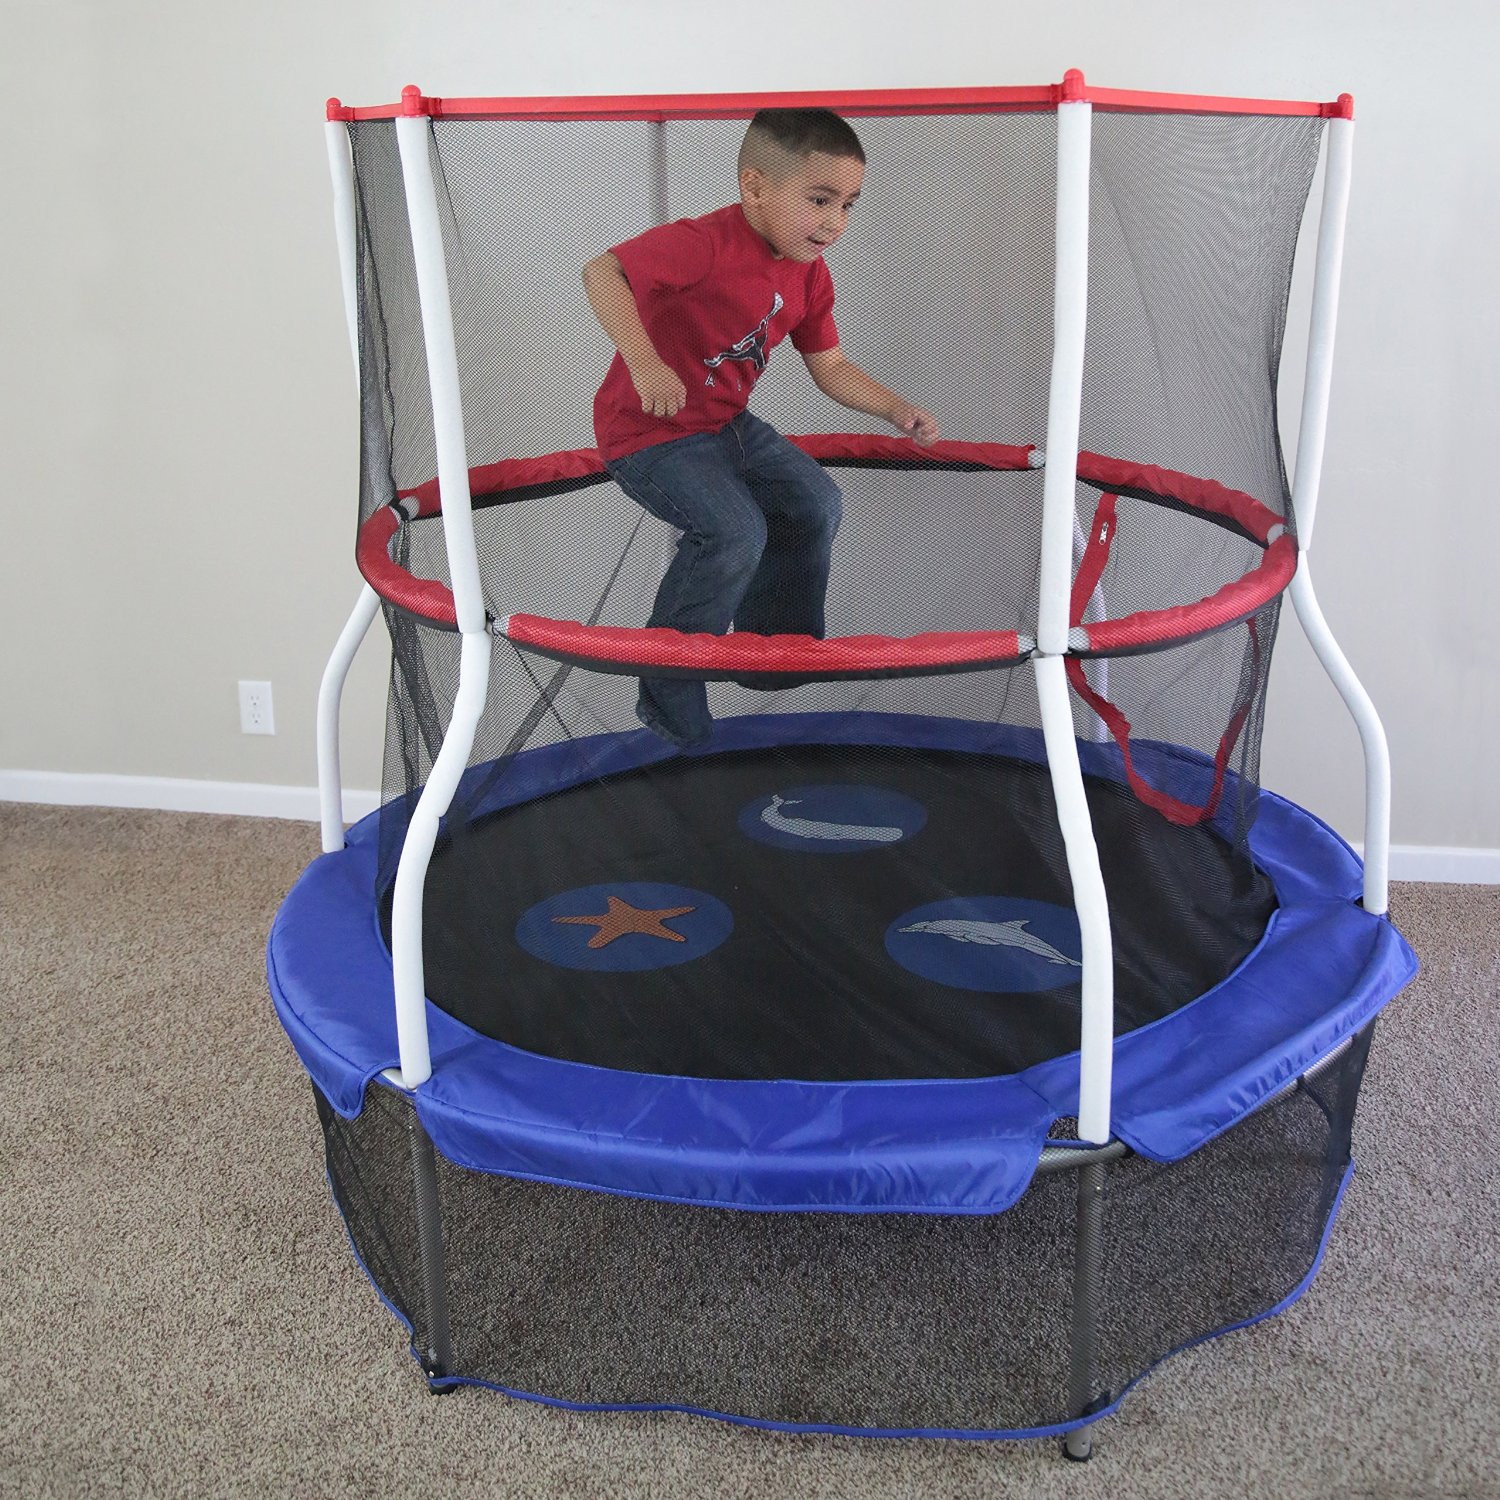 Best Indoor Trampoline For Kids
 Best Trampoline for Kids Our Top 3 Picks and Reviews